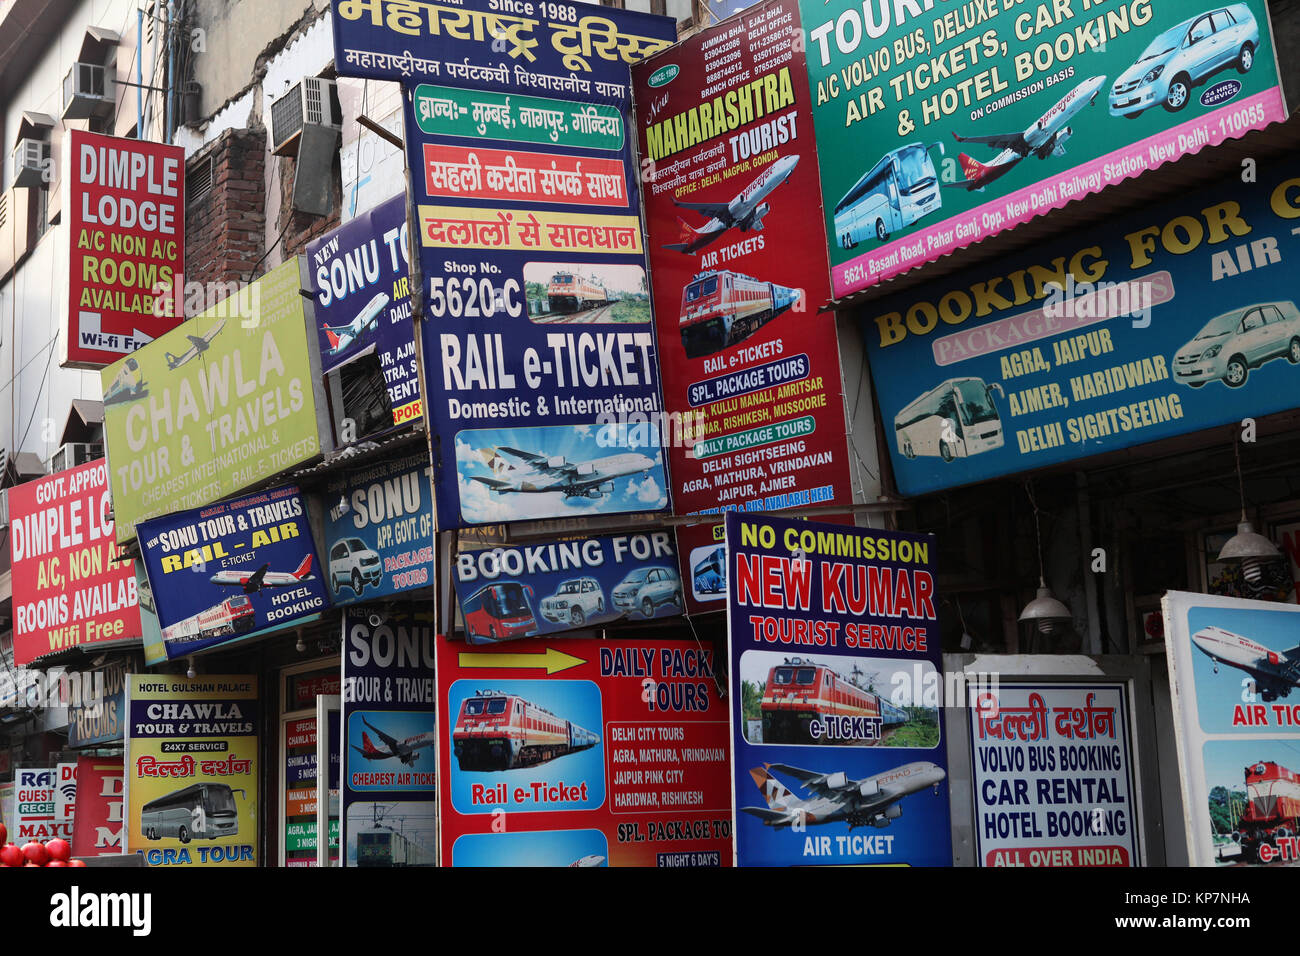 Signs for hotels and travel agents in the Paharganj district of New Delhi, India Stock Photo